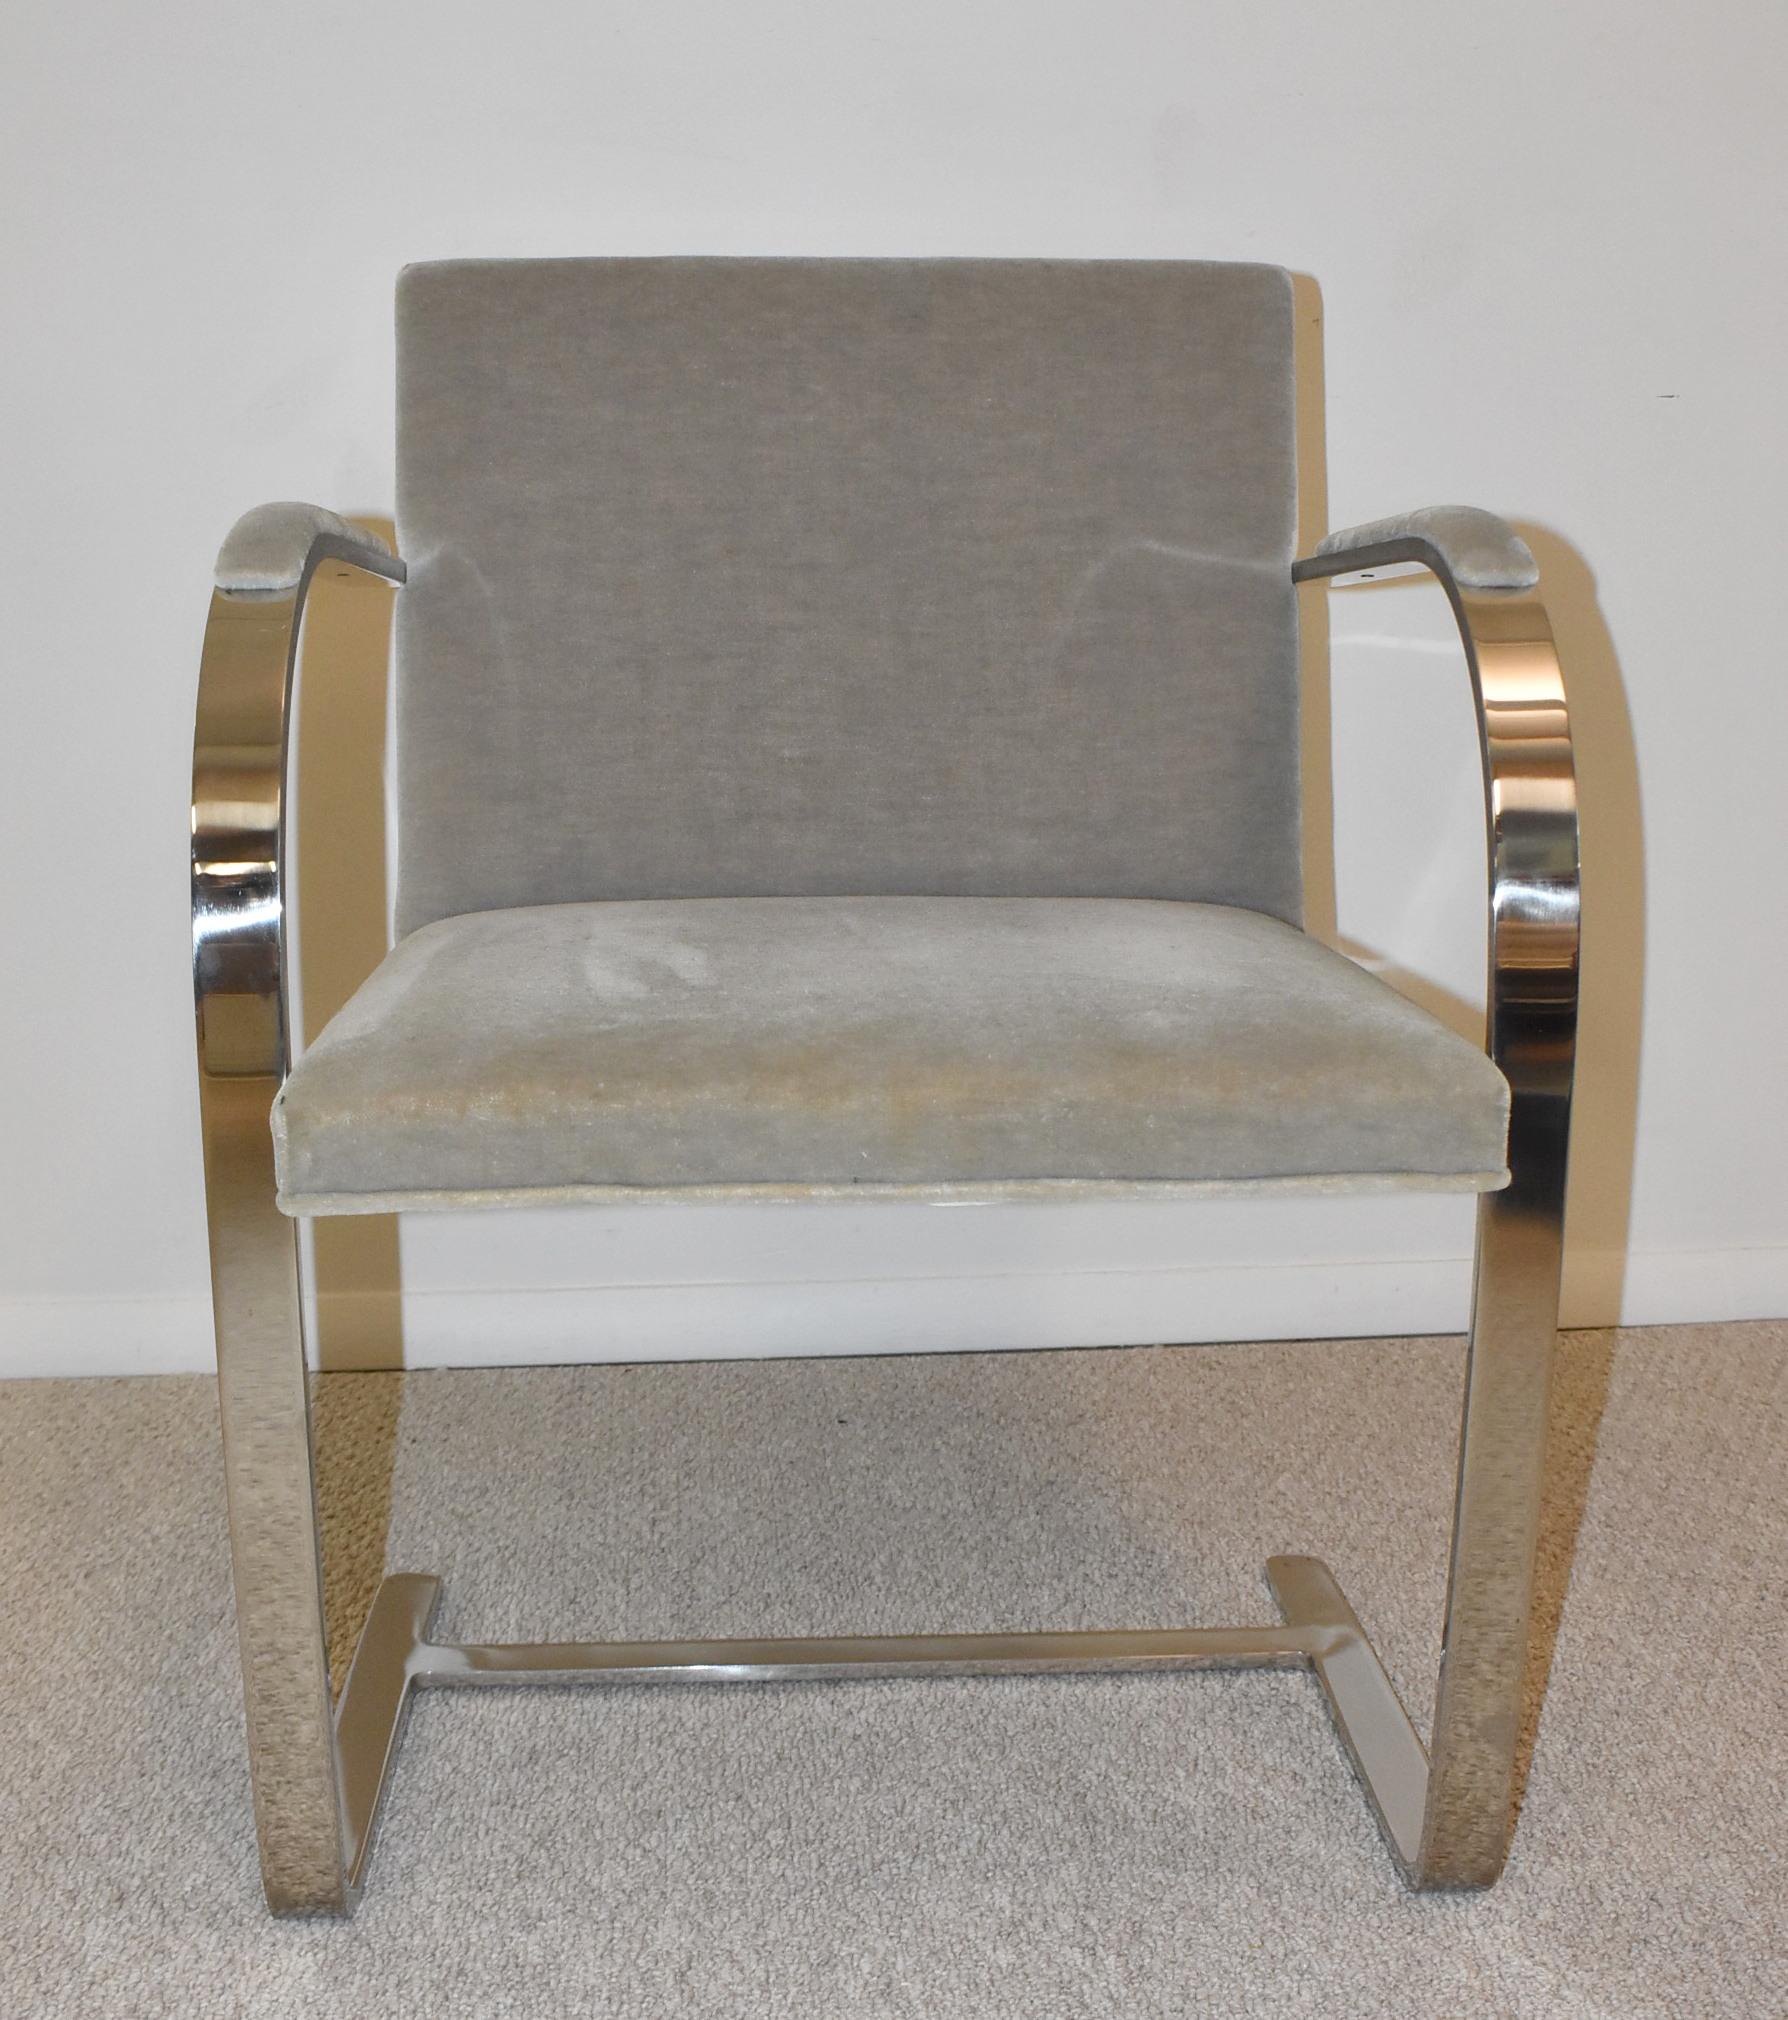 Ten Mies Van Der Rohe Chrome Dining Chairs for Knoll Mohair Fabric In Good Condition For Sale In Toledo, OH